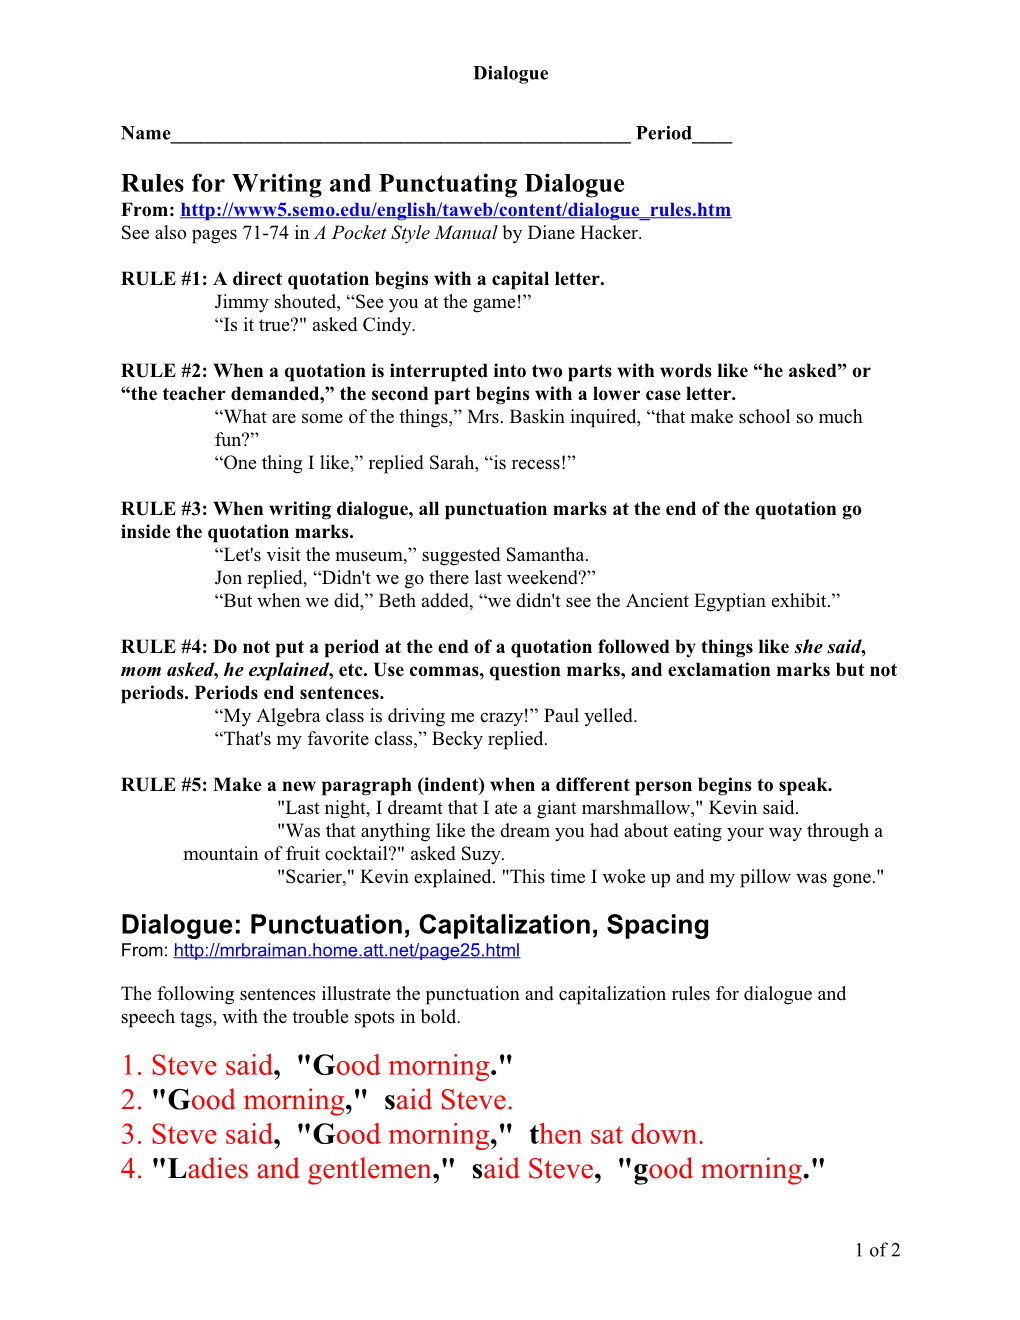 Rules for Writing and Punctuating Dialogue